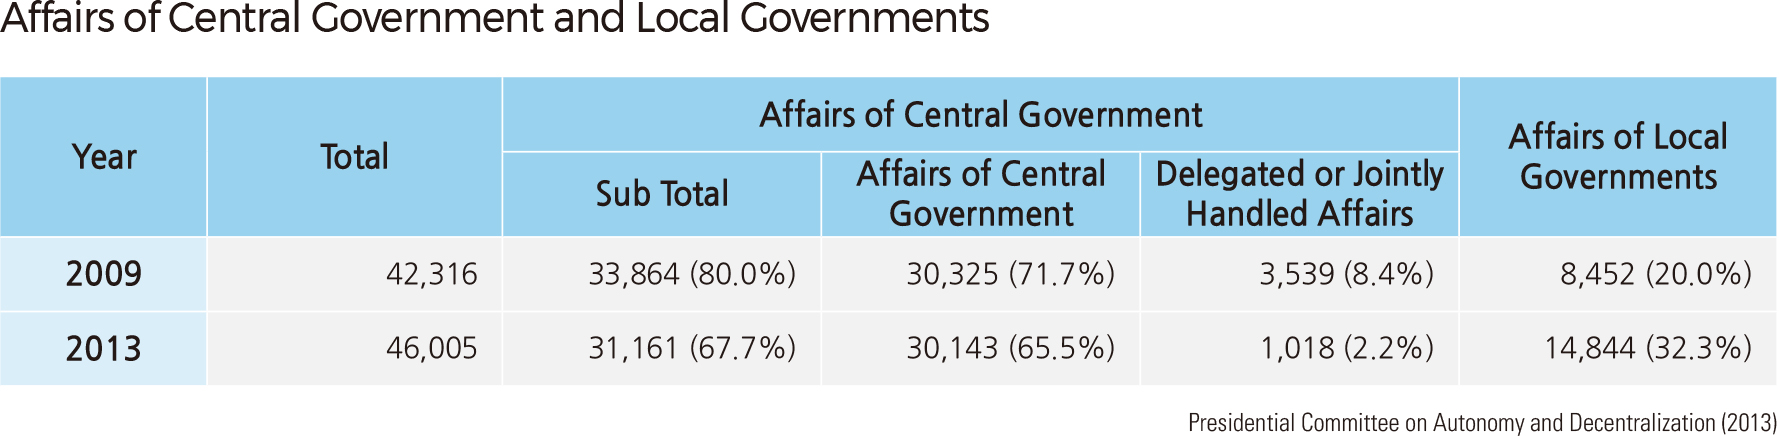 Affairs of Central Government and Local Governments